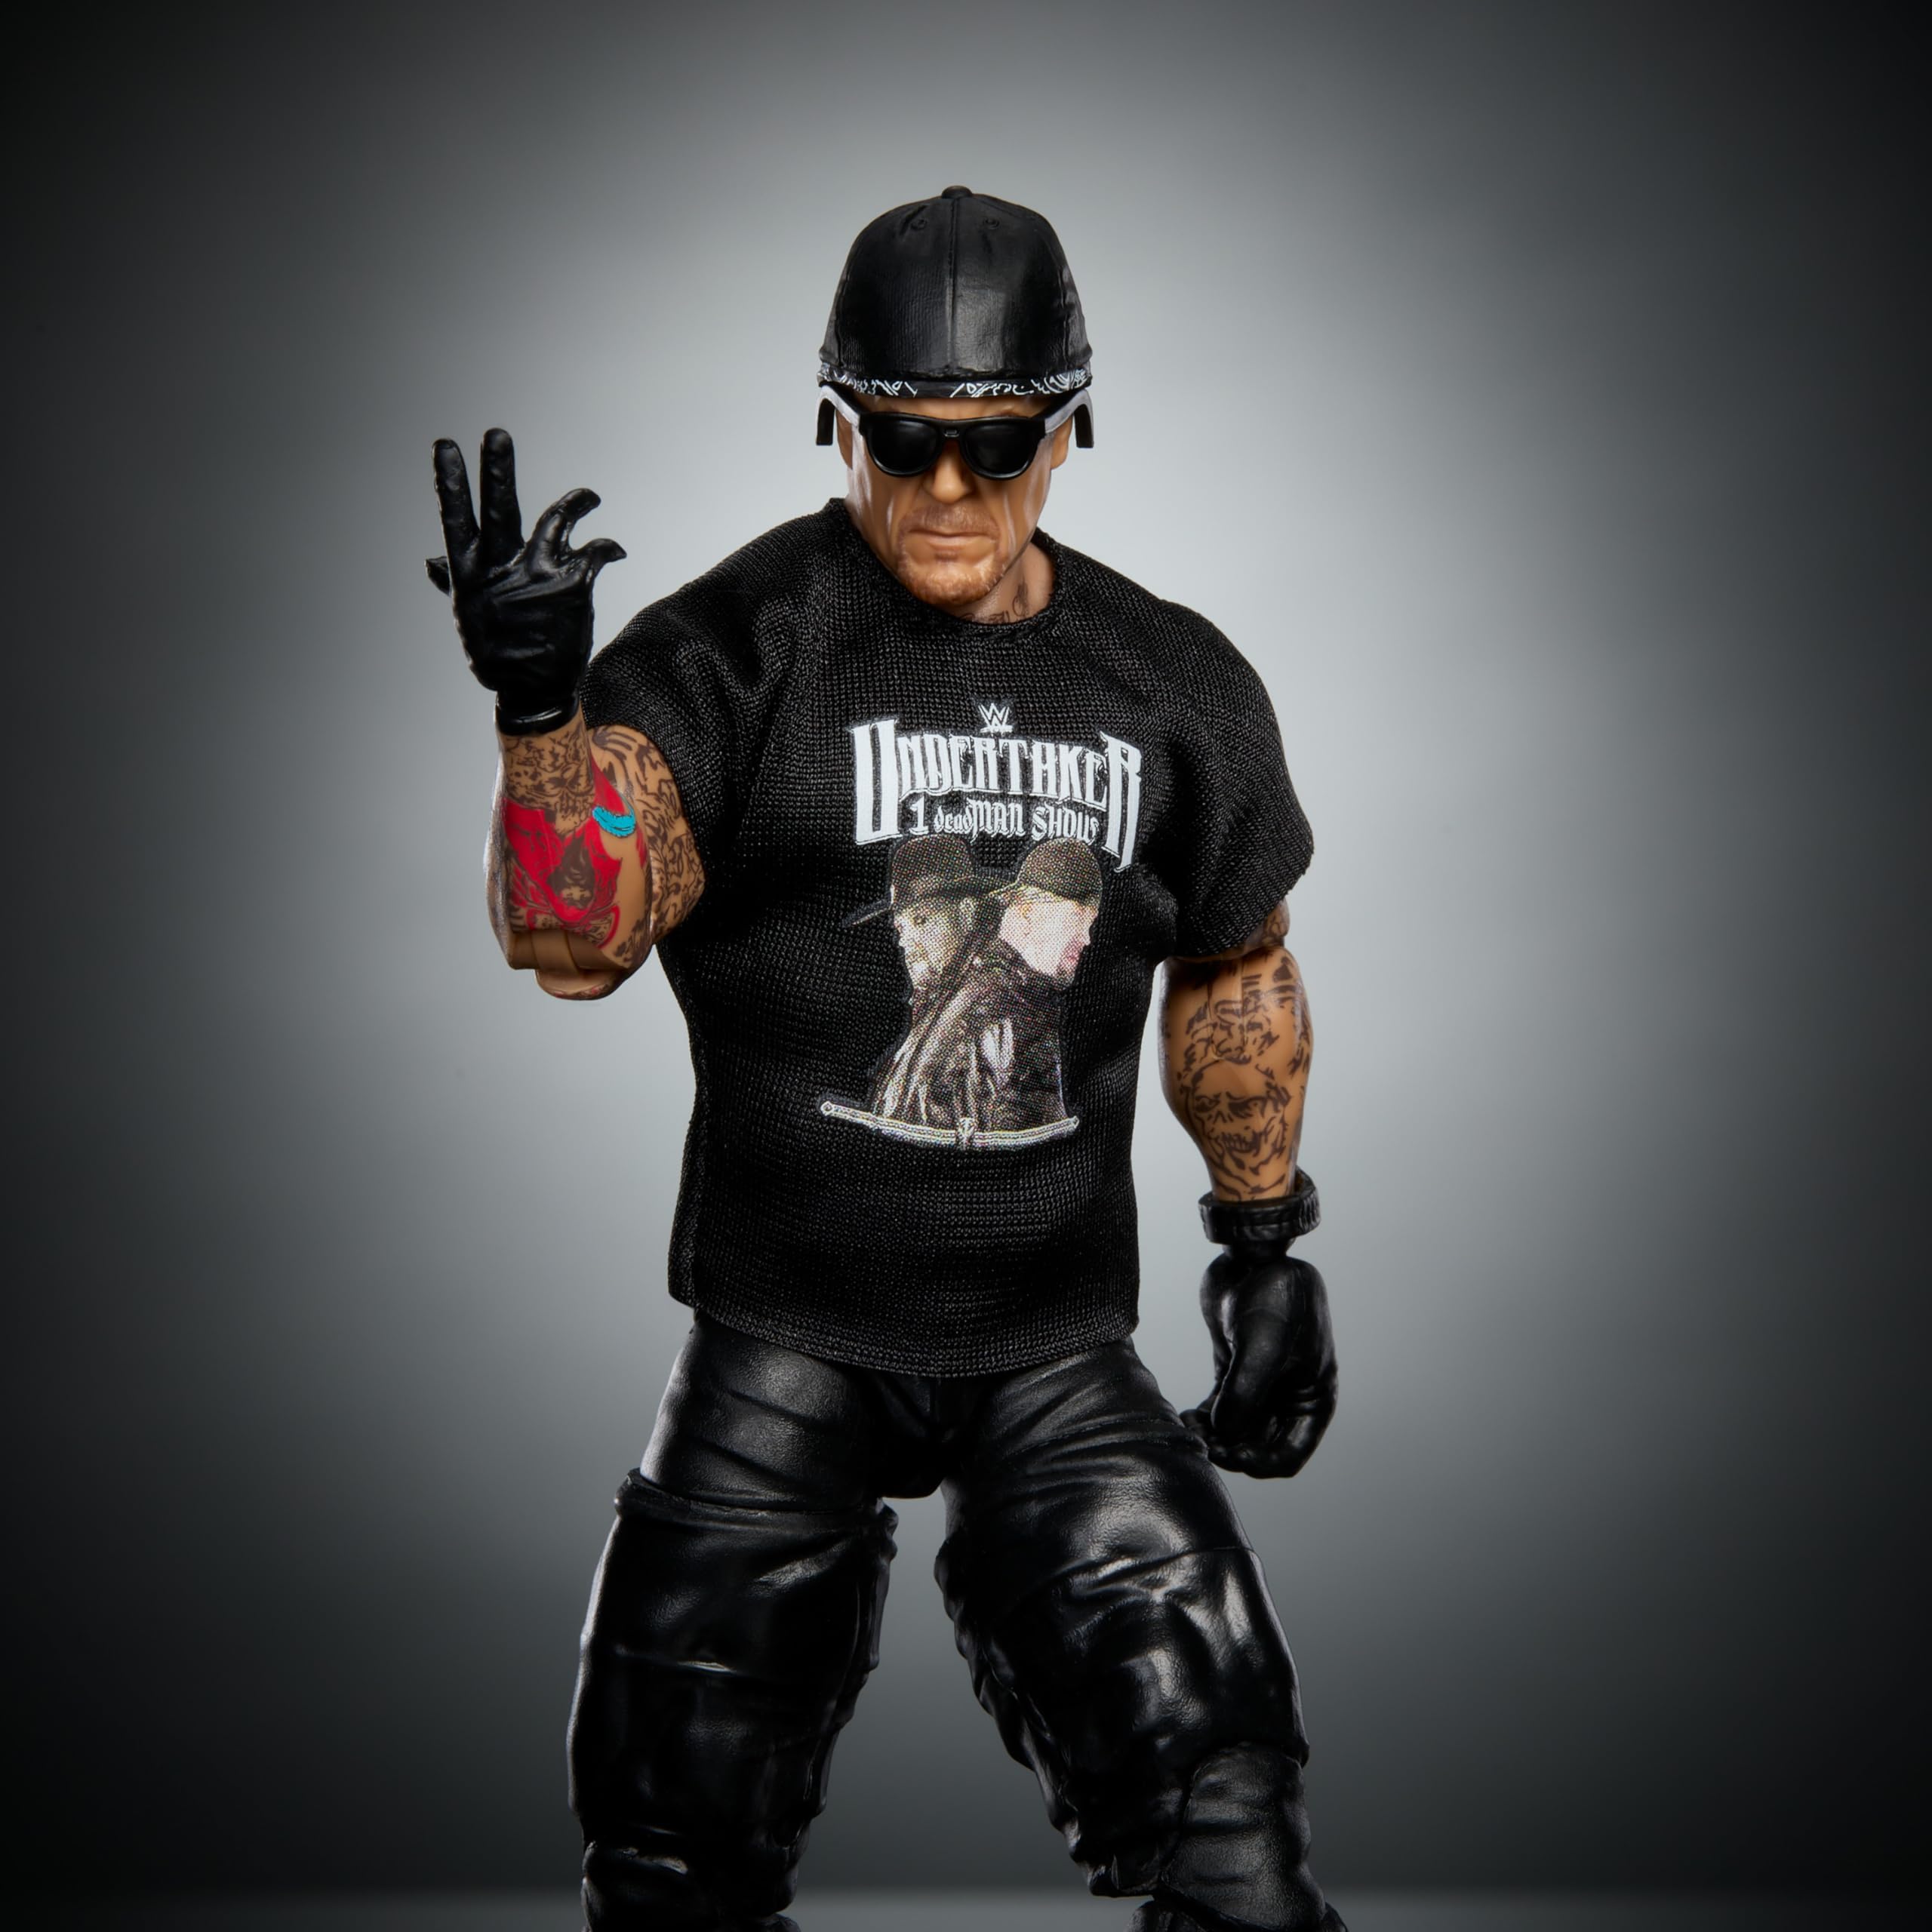 Mattel WWE Elite Action Figure & Accessories, 6-inch Collectible Undertaker with 25 Articulation Points, Life-Like Look & Swappable Hands